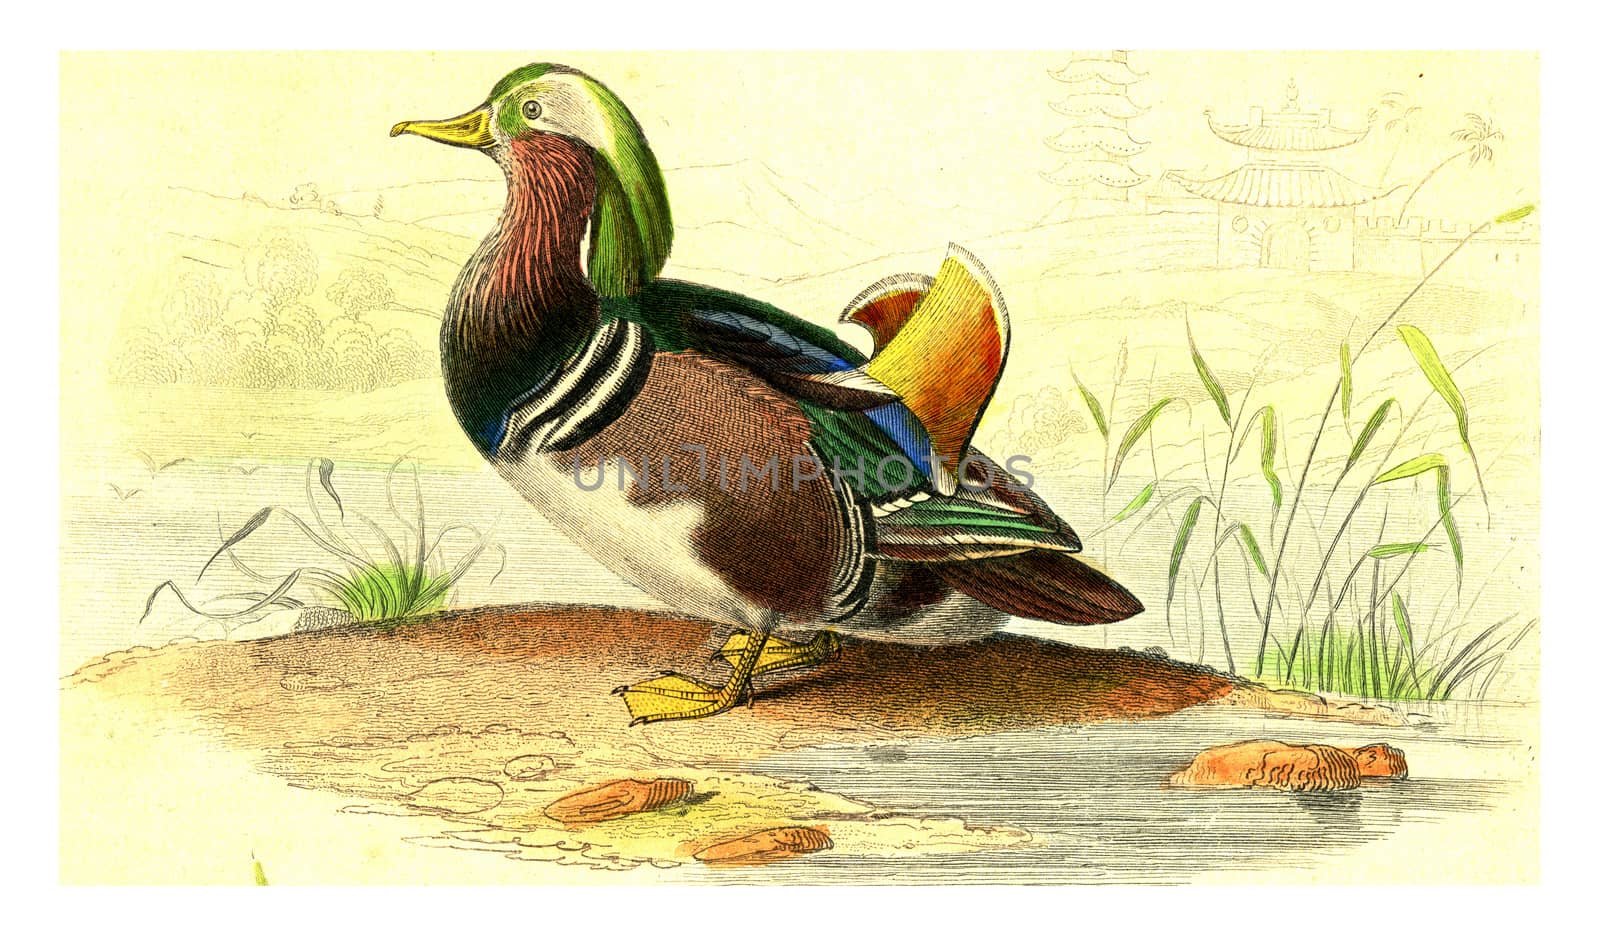 Duck range of China, vintage engraved illustration. From Buffon Complete Work.
